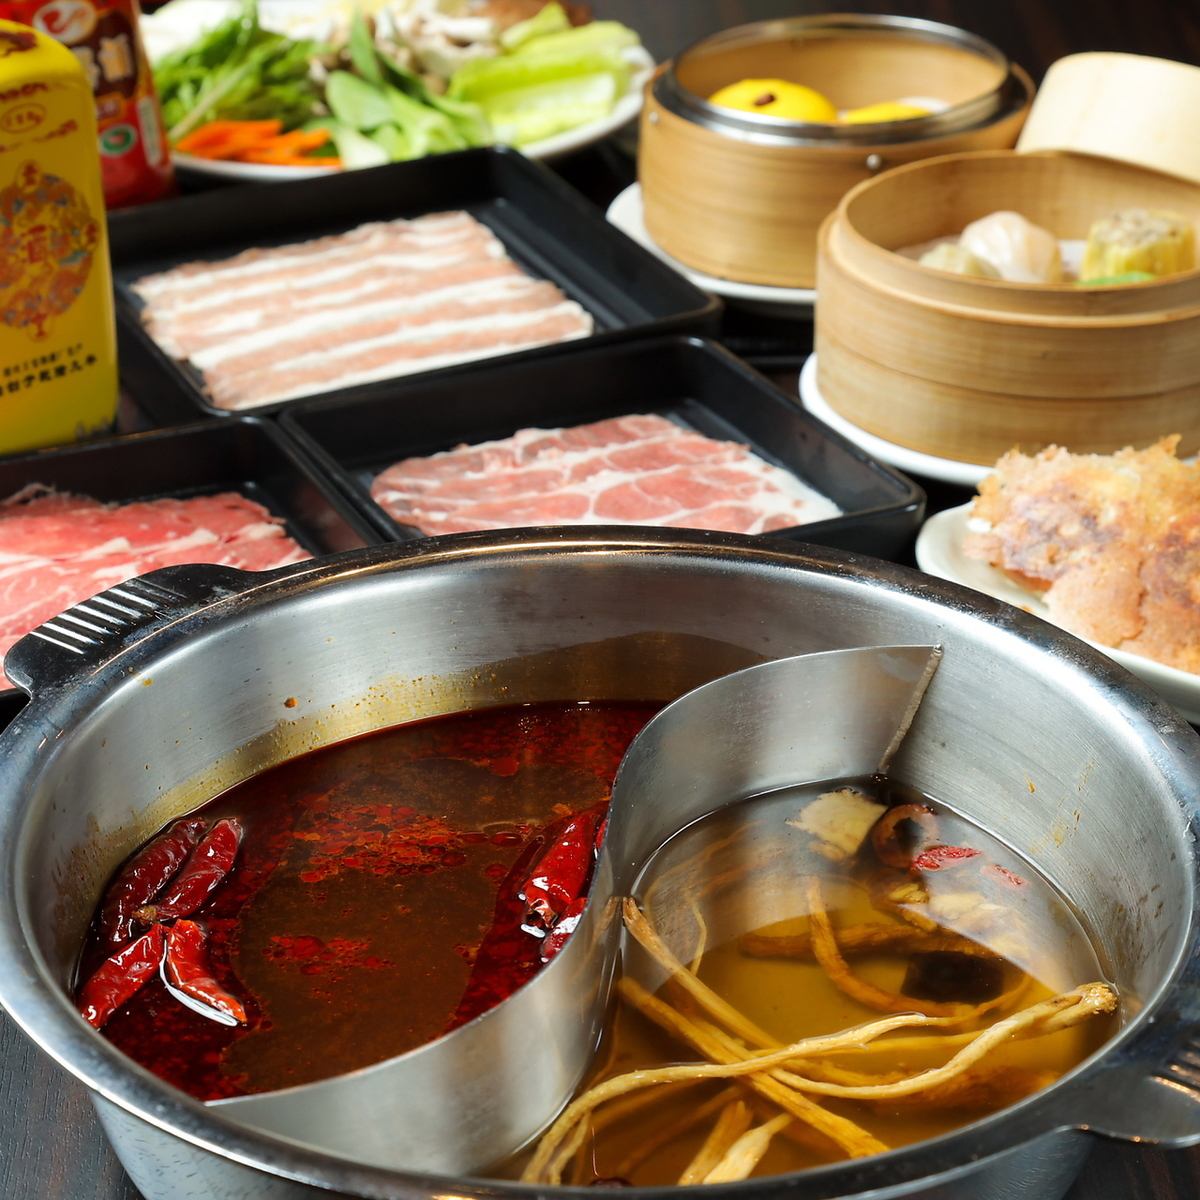 2 choices from 4 types of shabu-shabu: hot water/spicy/medicinal/seafood and kelp